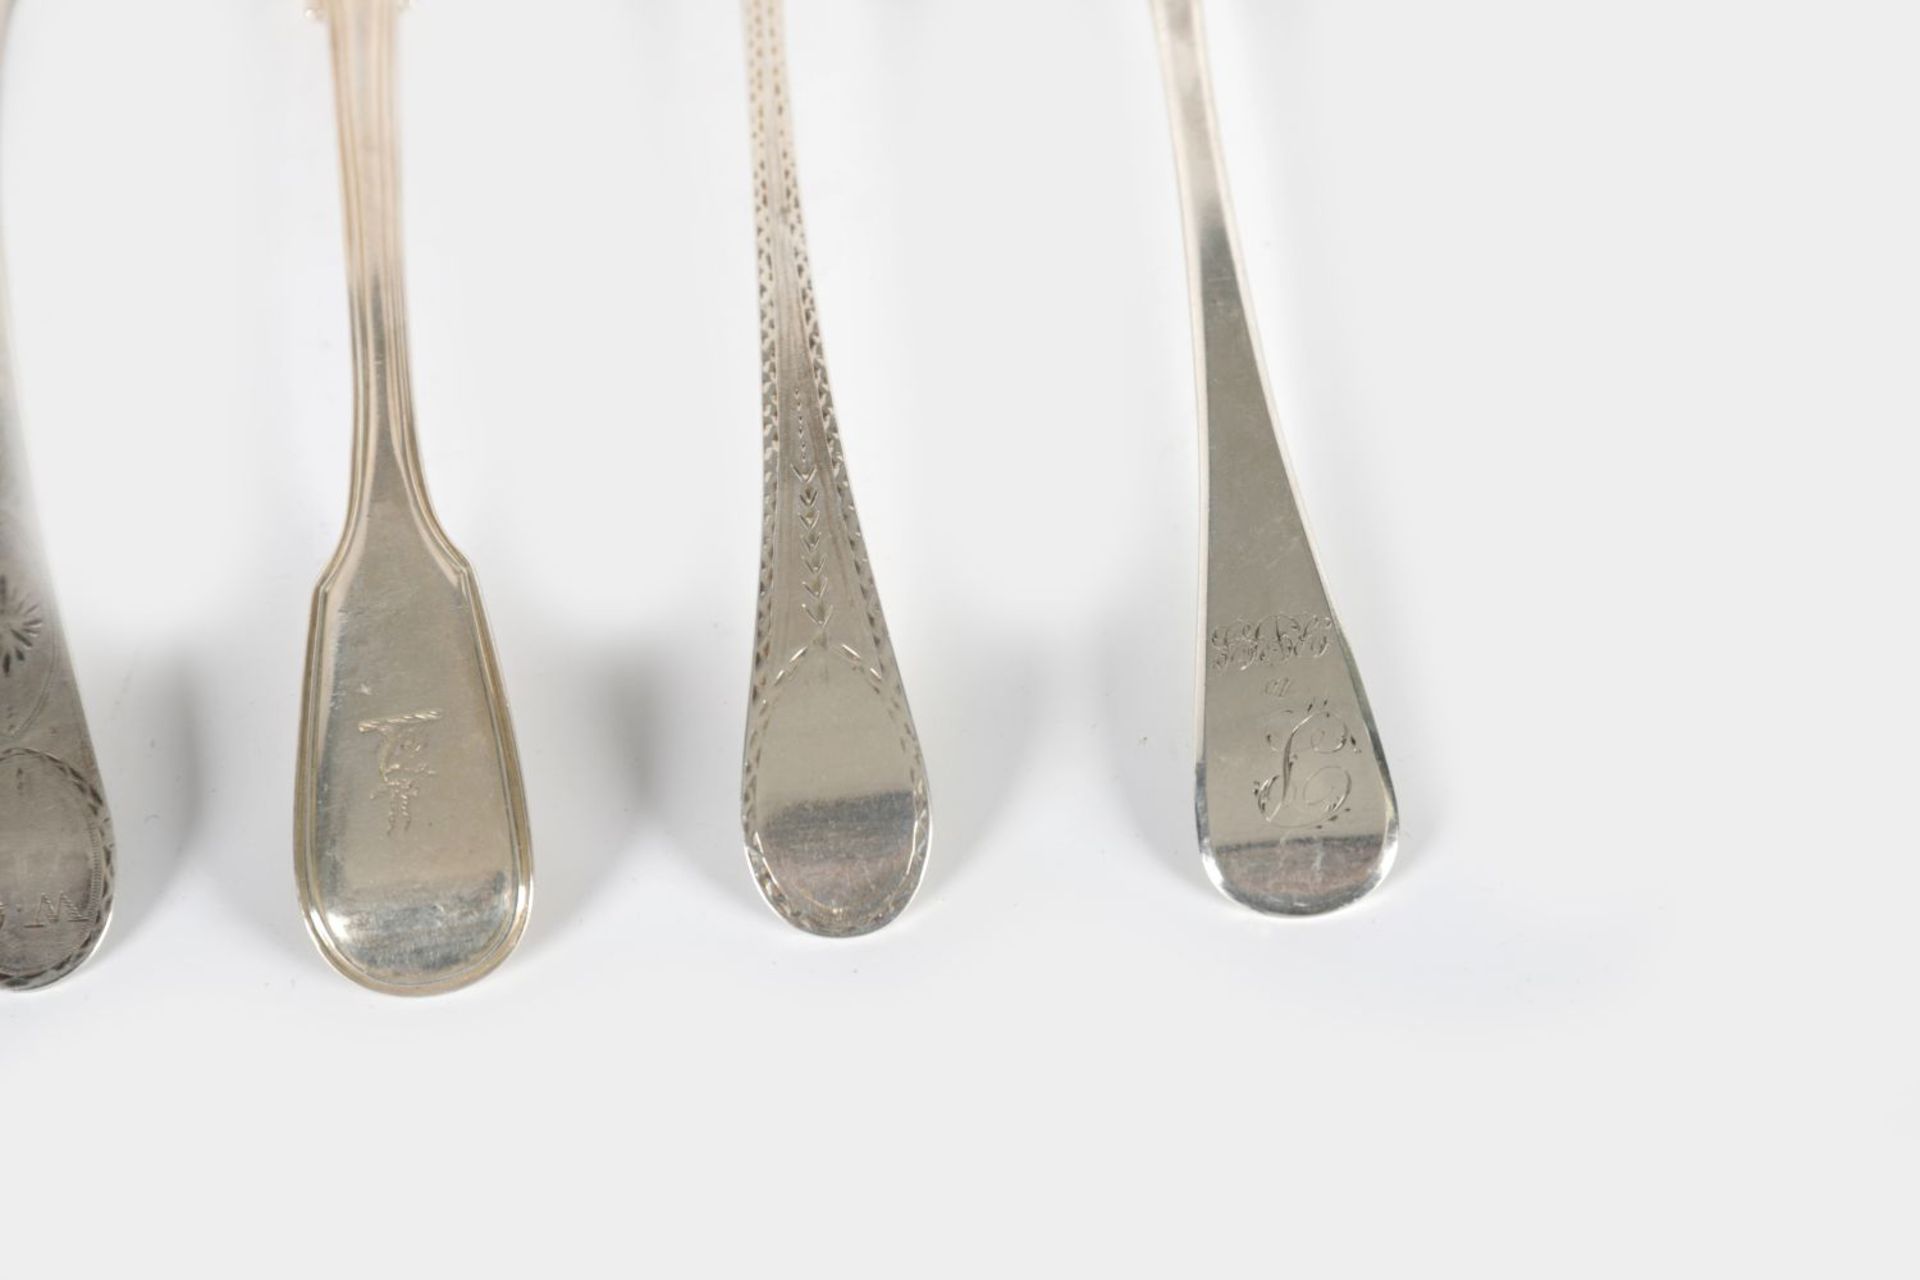 SET OF 5 SILVER SERVING SPOONS - Image 2 of 3